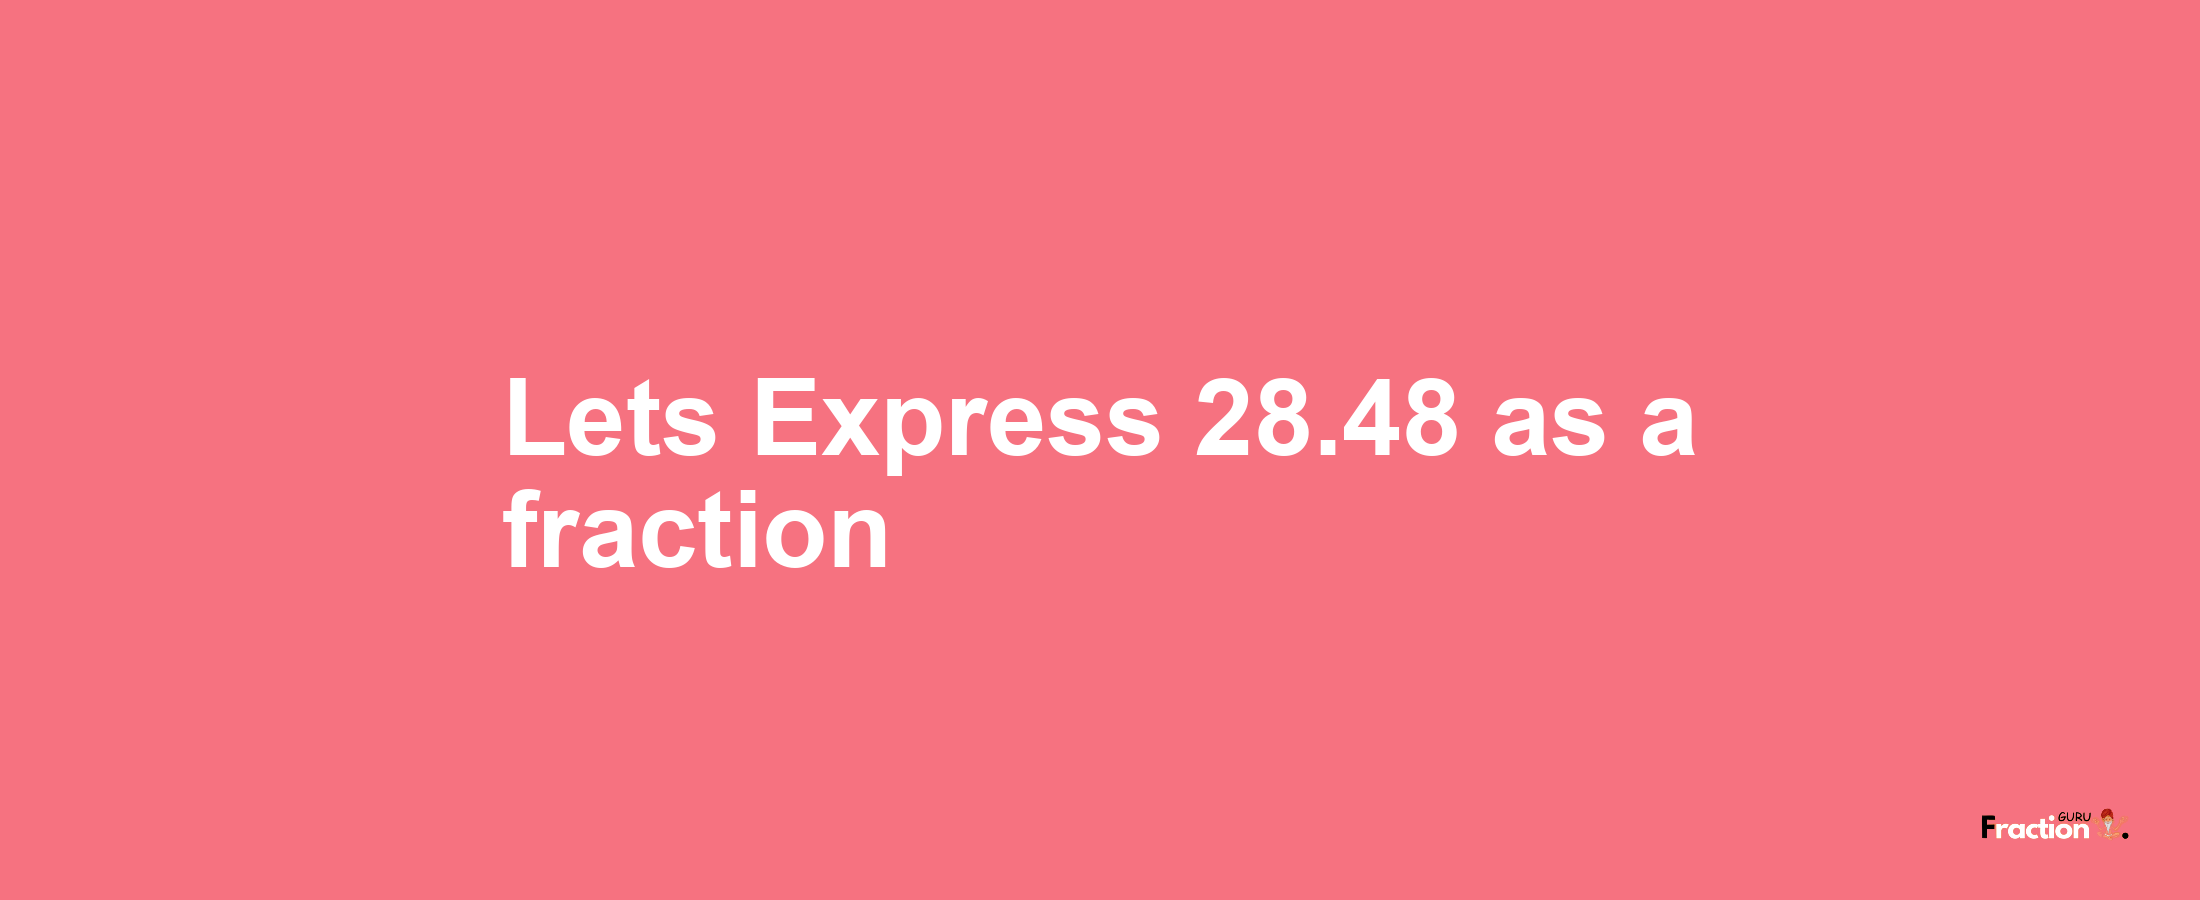 Lets Express 28.48 as afraction